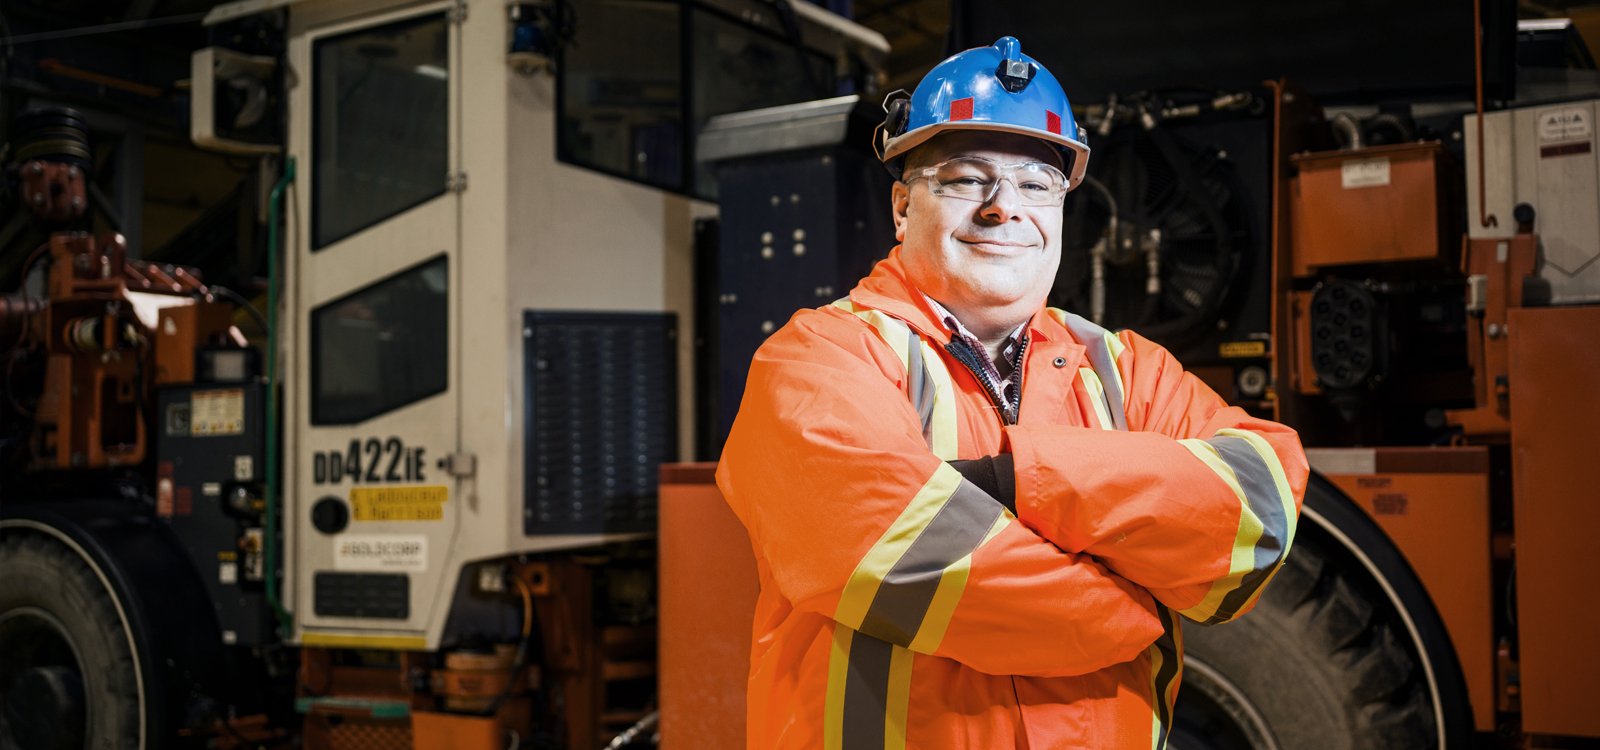 Luc Joncas, project manager at Borden Lake, calls Sandvik DD422iE “the star of the fleet” at the project being developed as the world’s first all-electric underground mine.